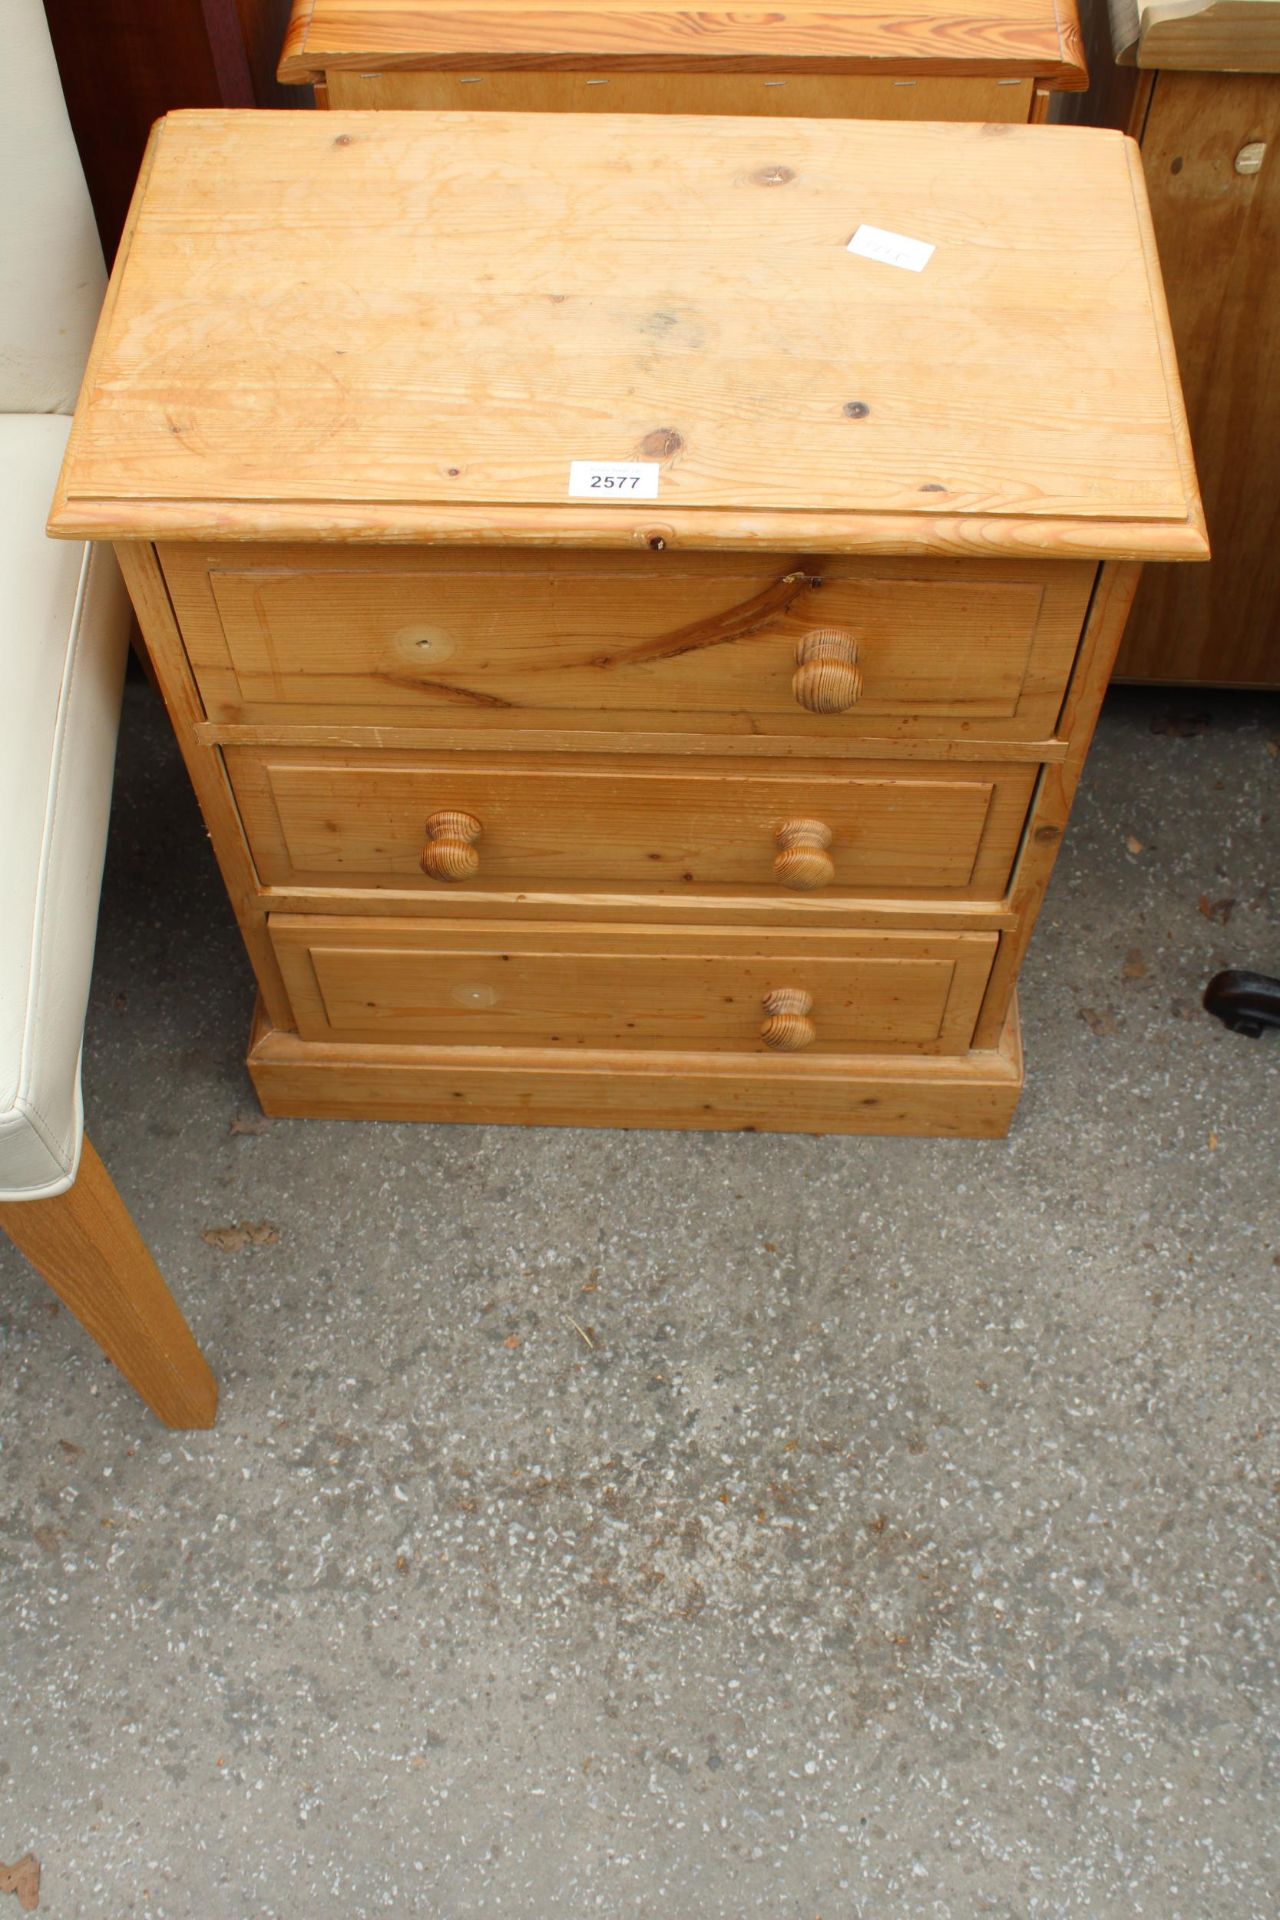 A PINE BEDSIDE CHEST OF THREE DRAWERS, 20" WIDE